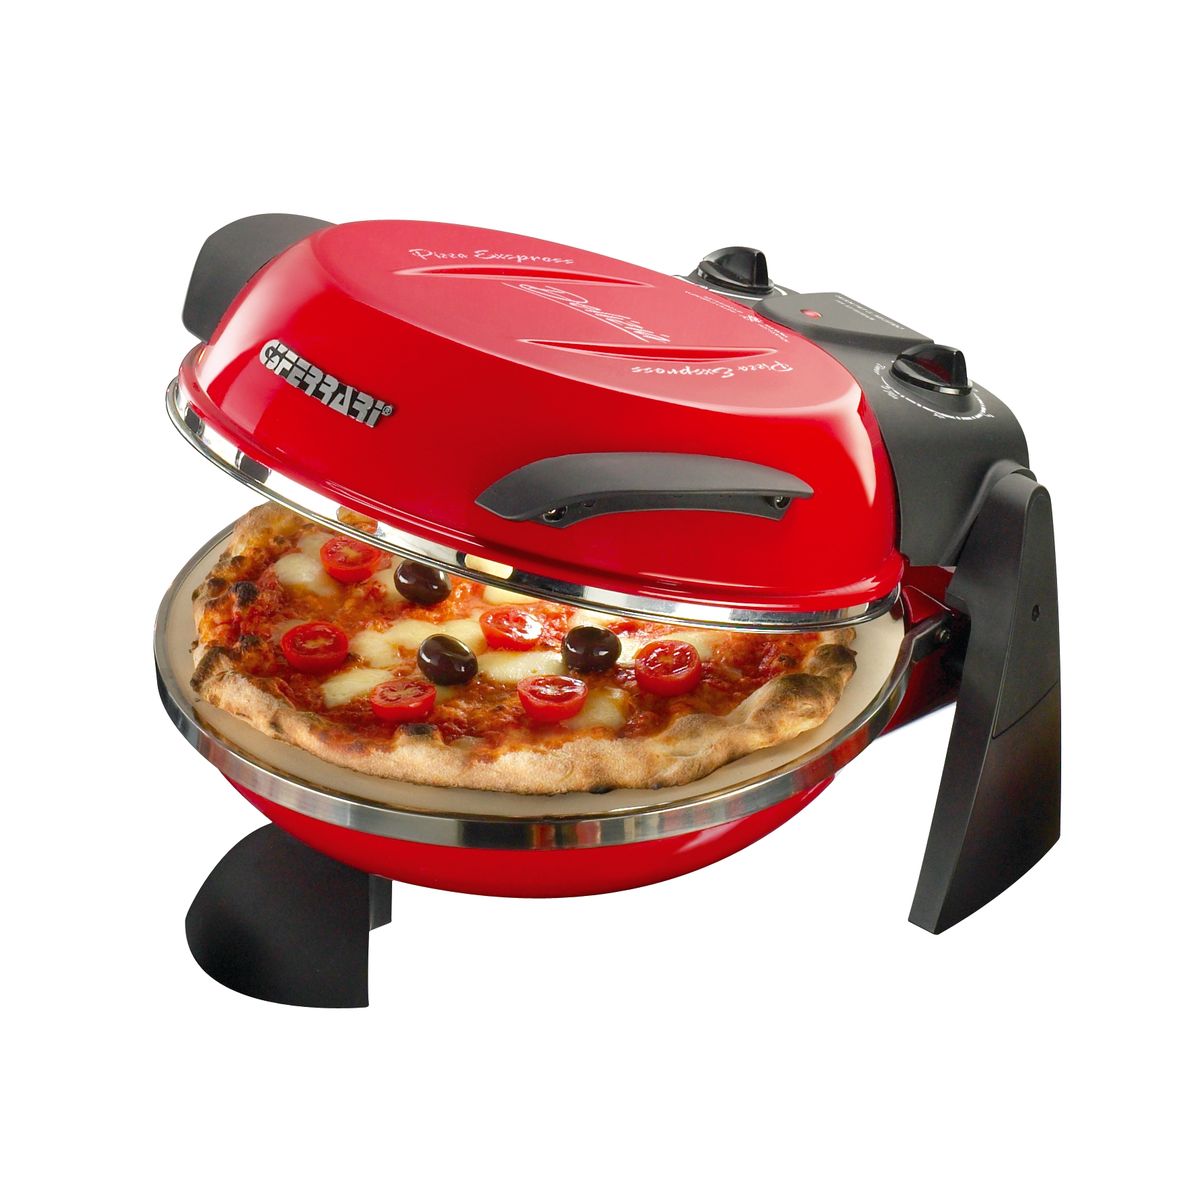 G3 Ferrari 5 Minute 1200W Electric Pizza Oven- Red, Shop Today. Get it  Tomorrow!